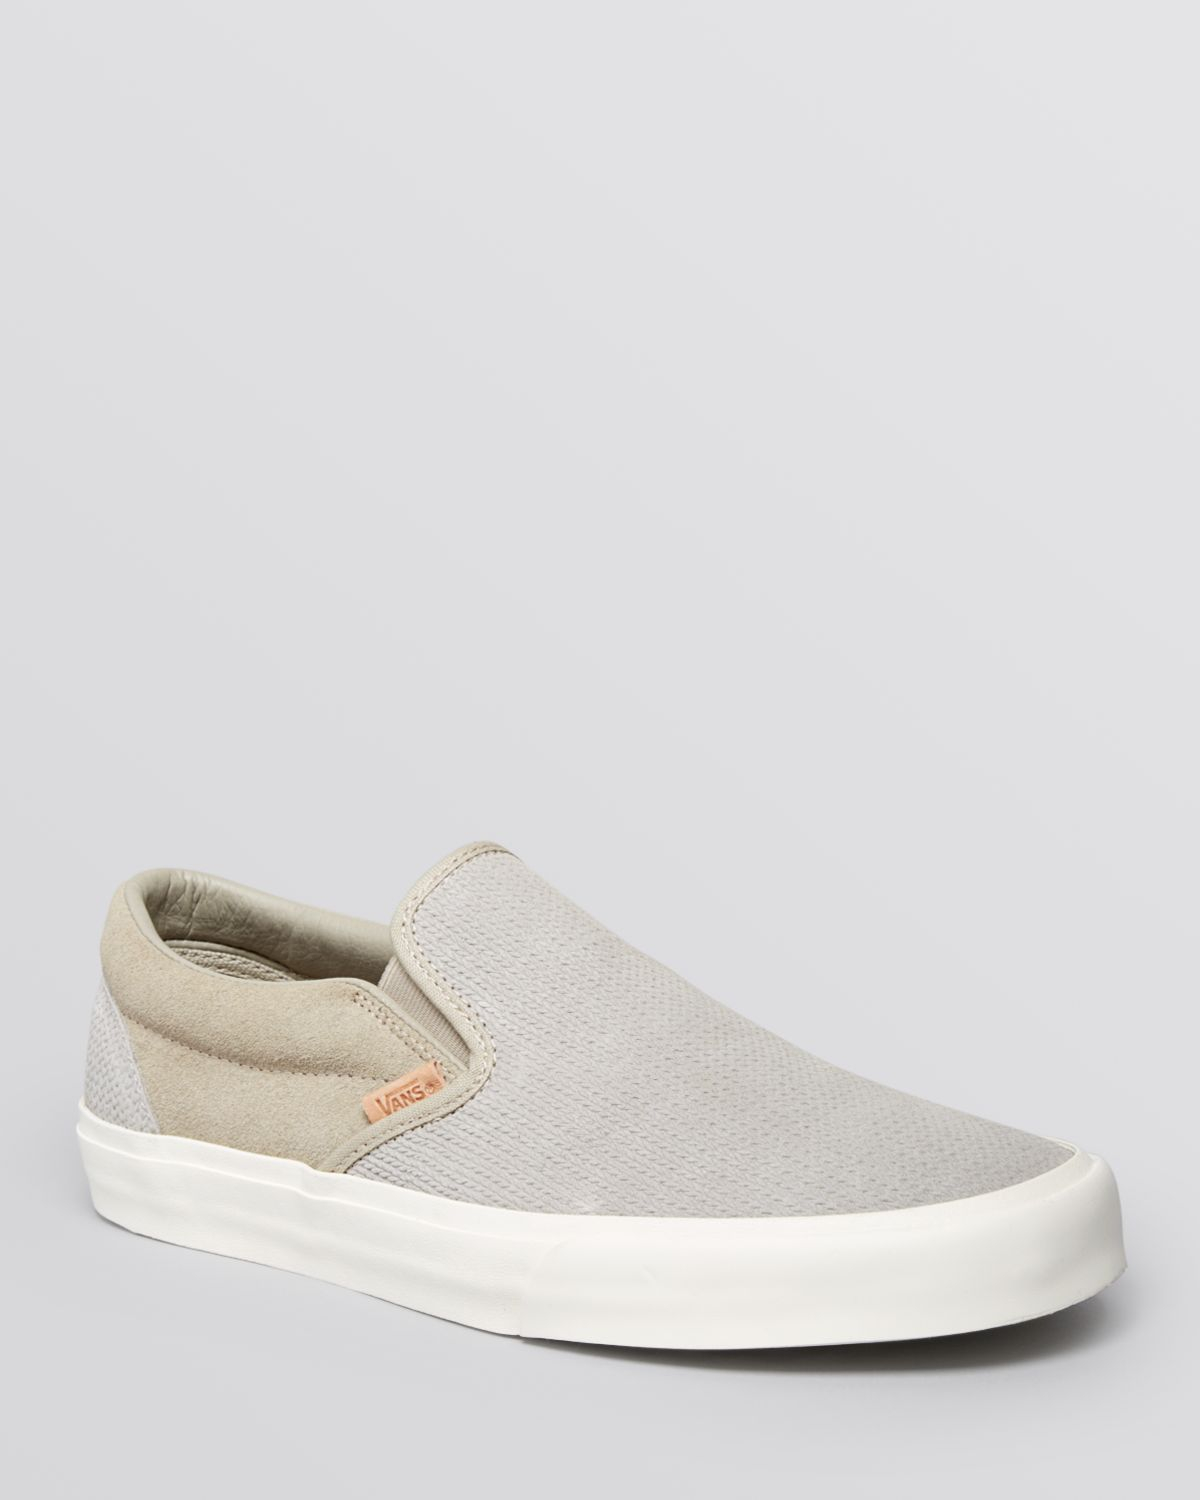 vans classic leather and suede slip on 